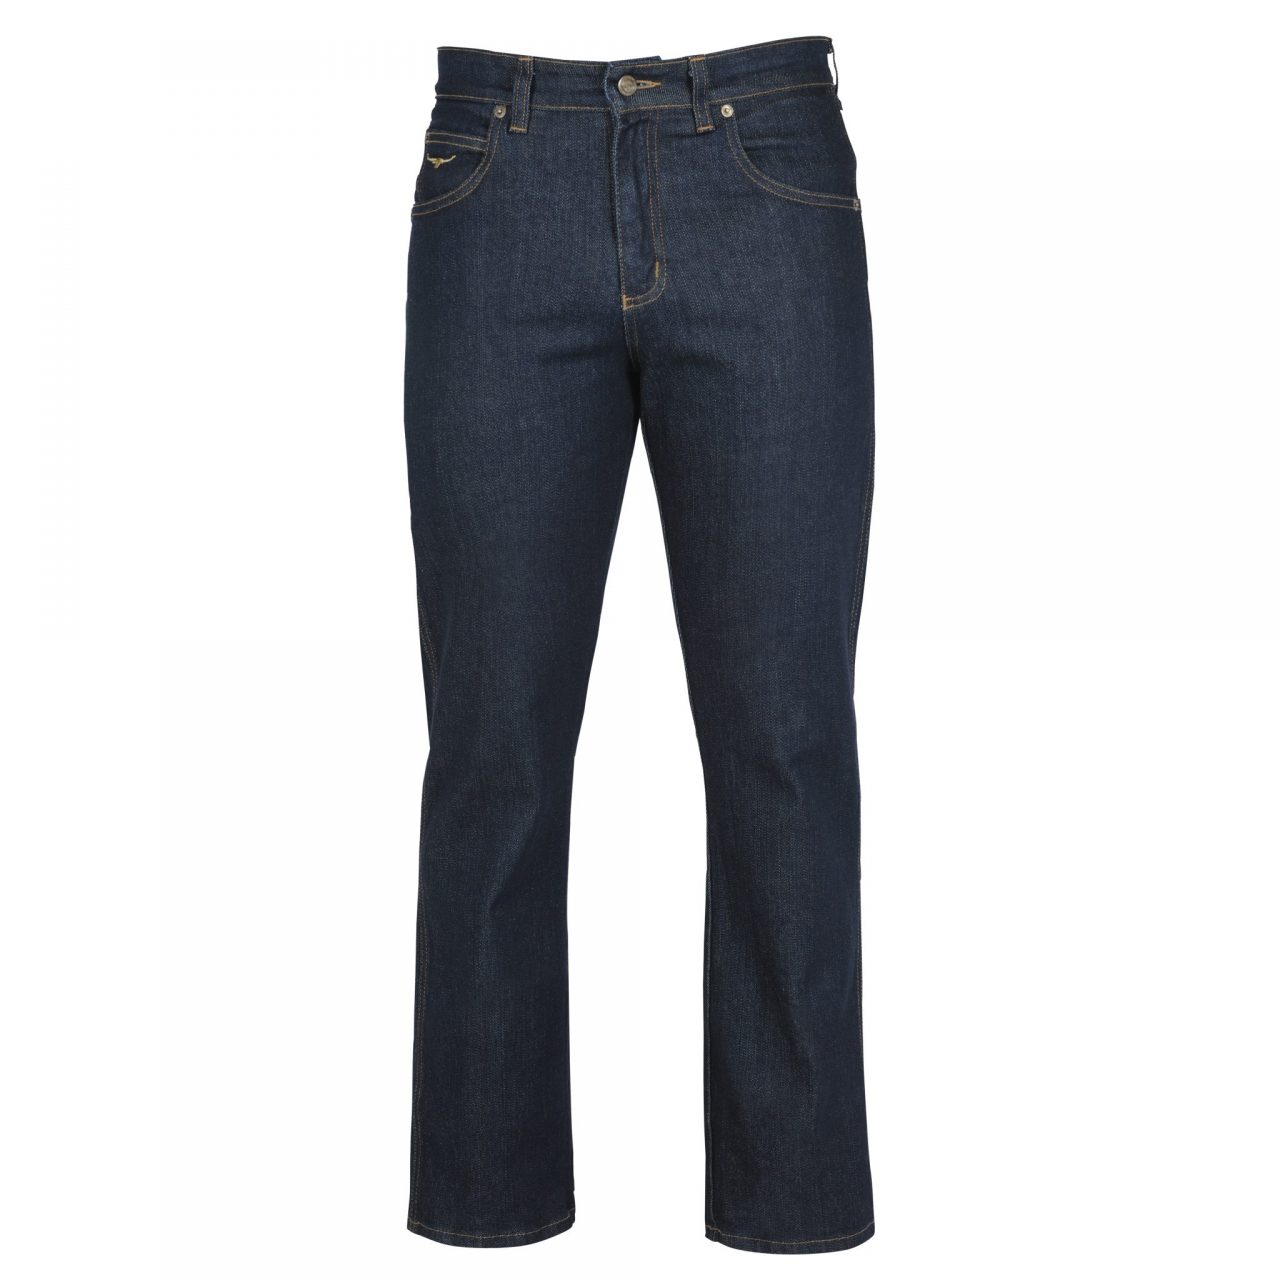 RM Williams Linesman Stretch Denim Jeans, slim fit, low rise - Wallers ...